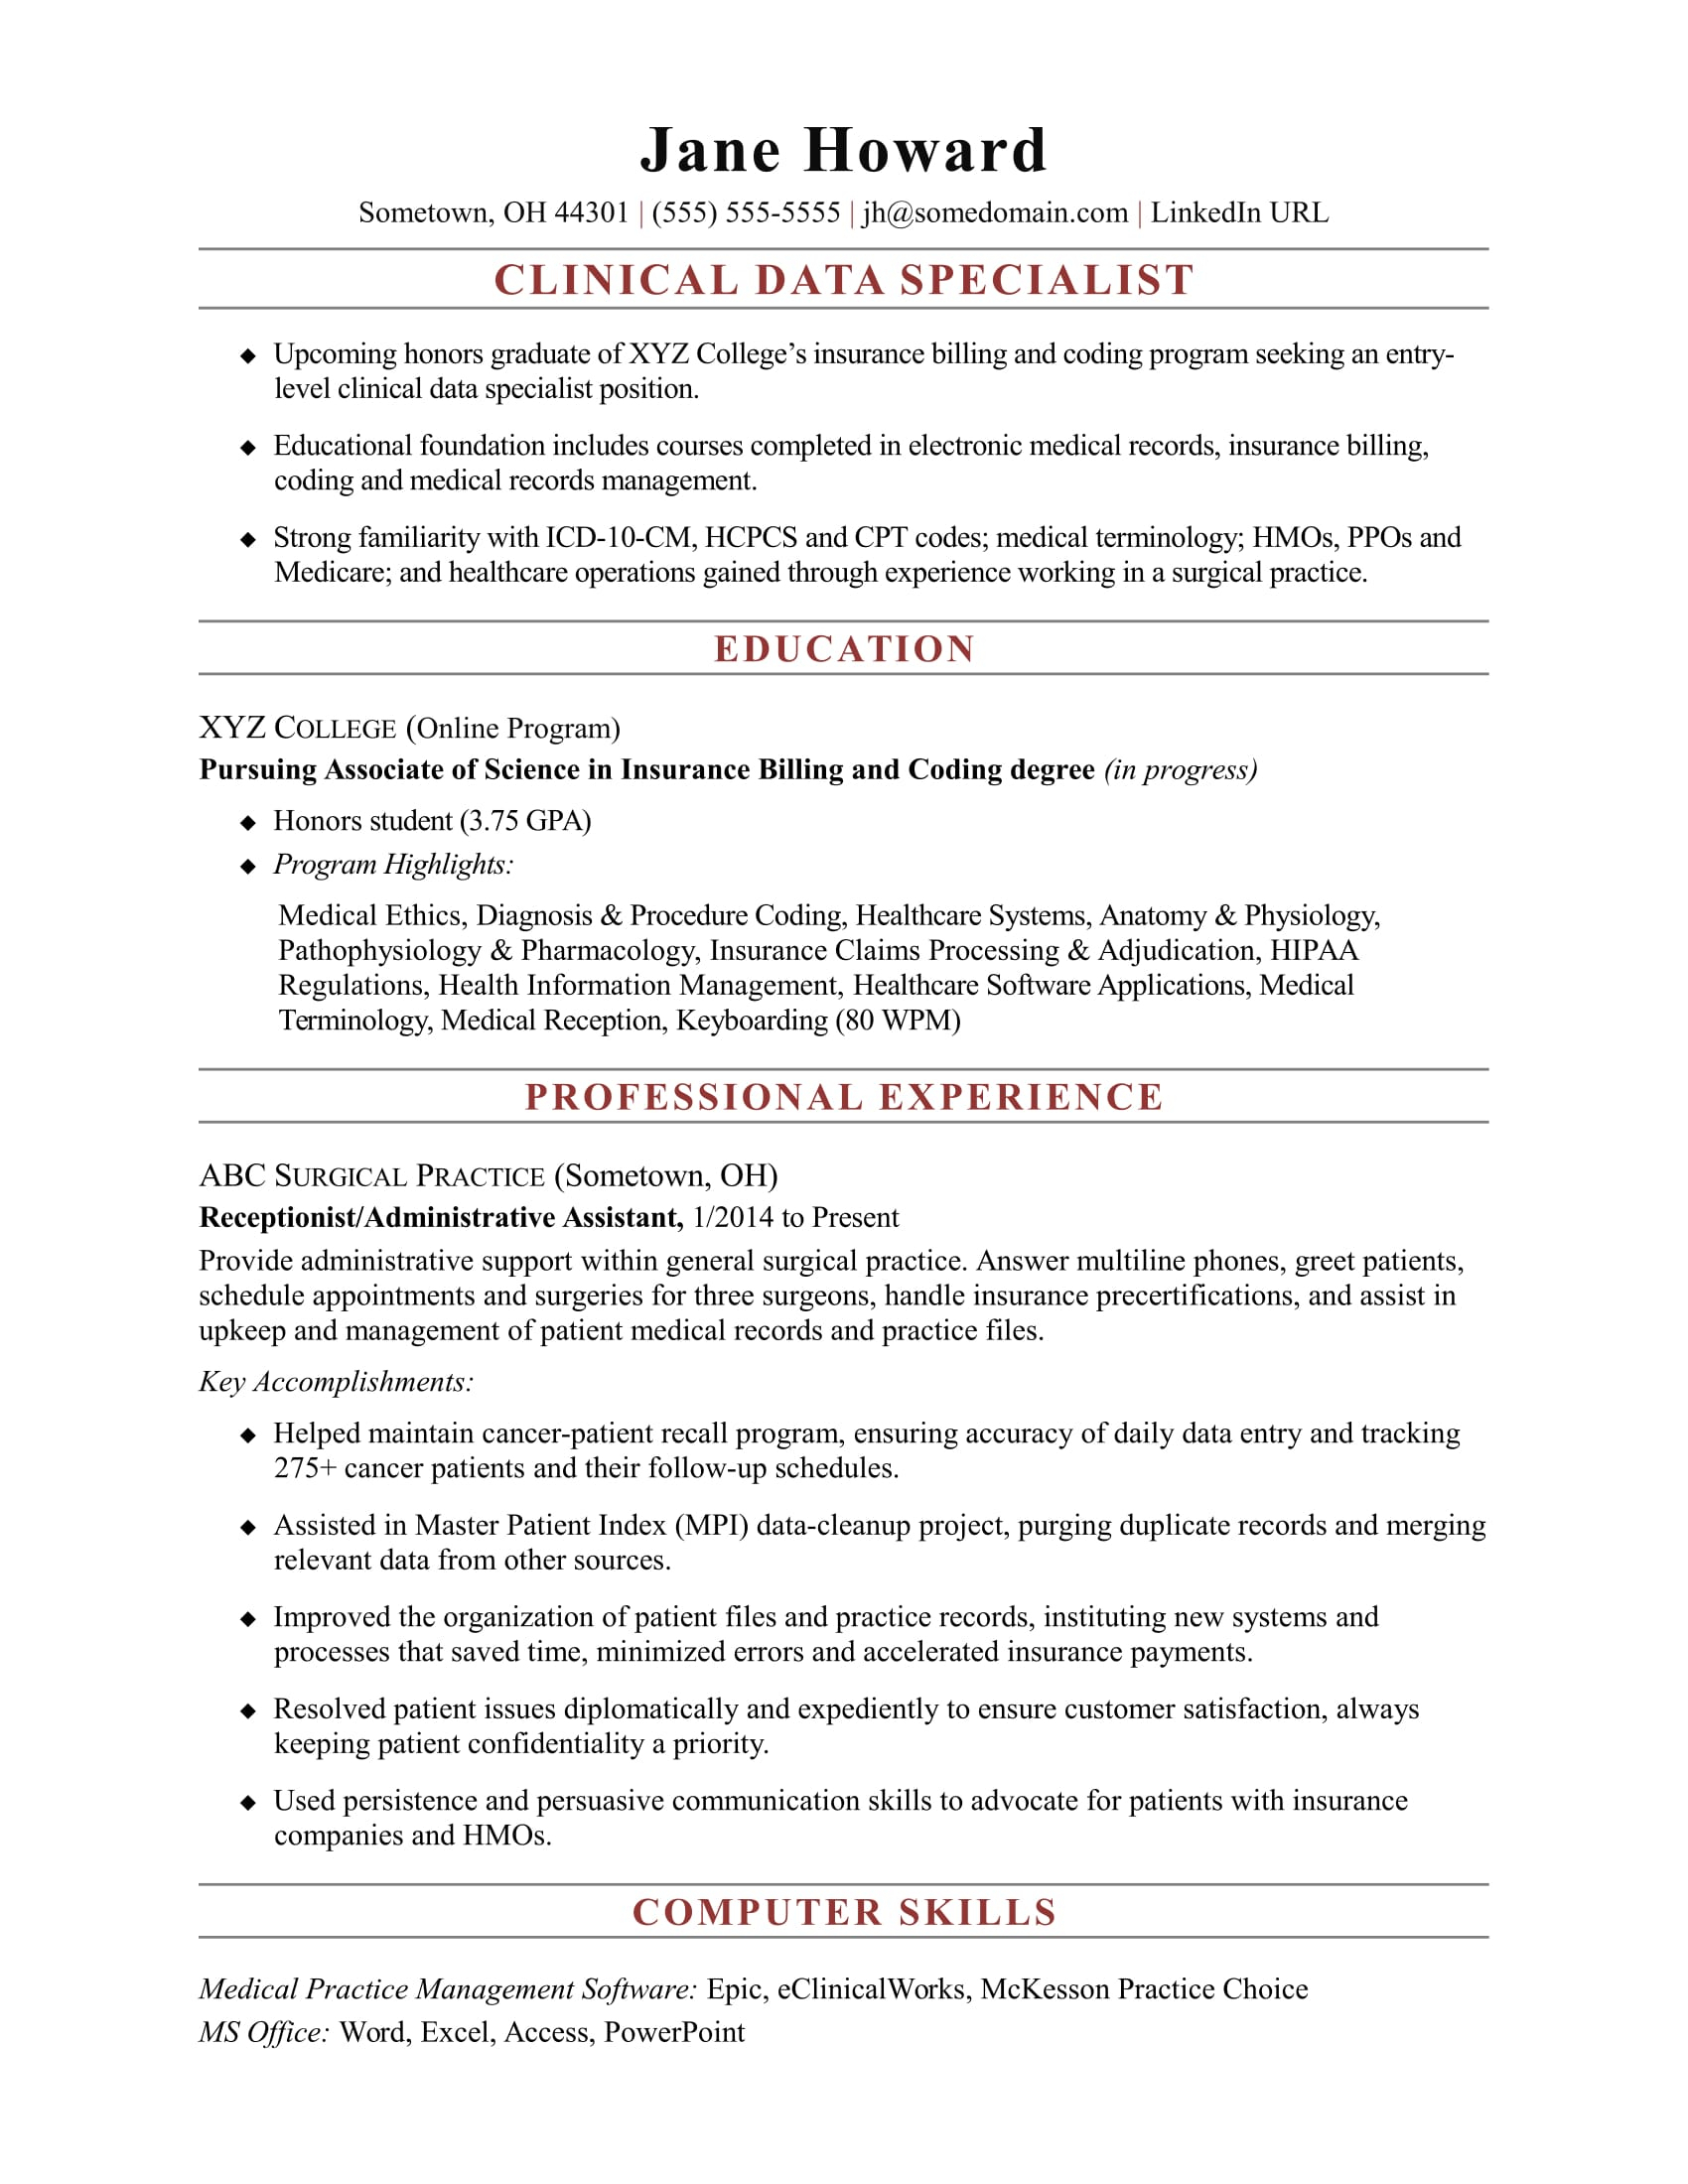 Excel Spreadsheet Specialist Intended For Entrylevel Clinical Data Specialist Resume Sample  Monster